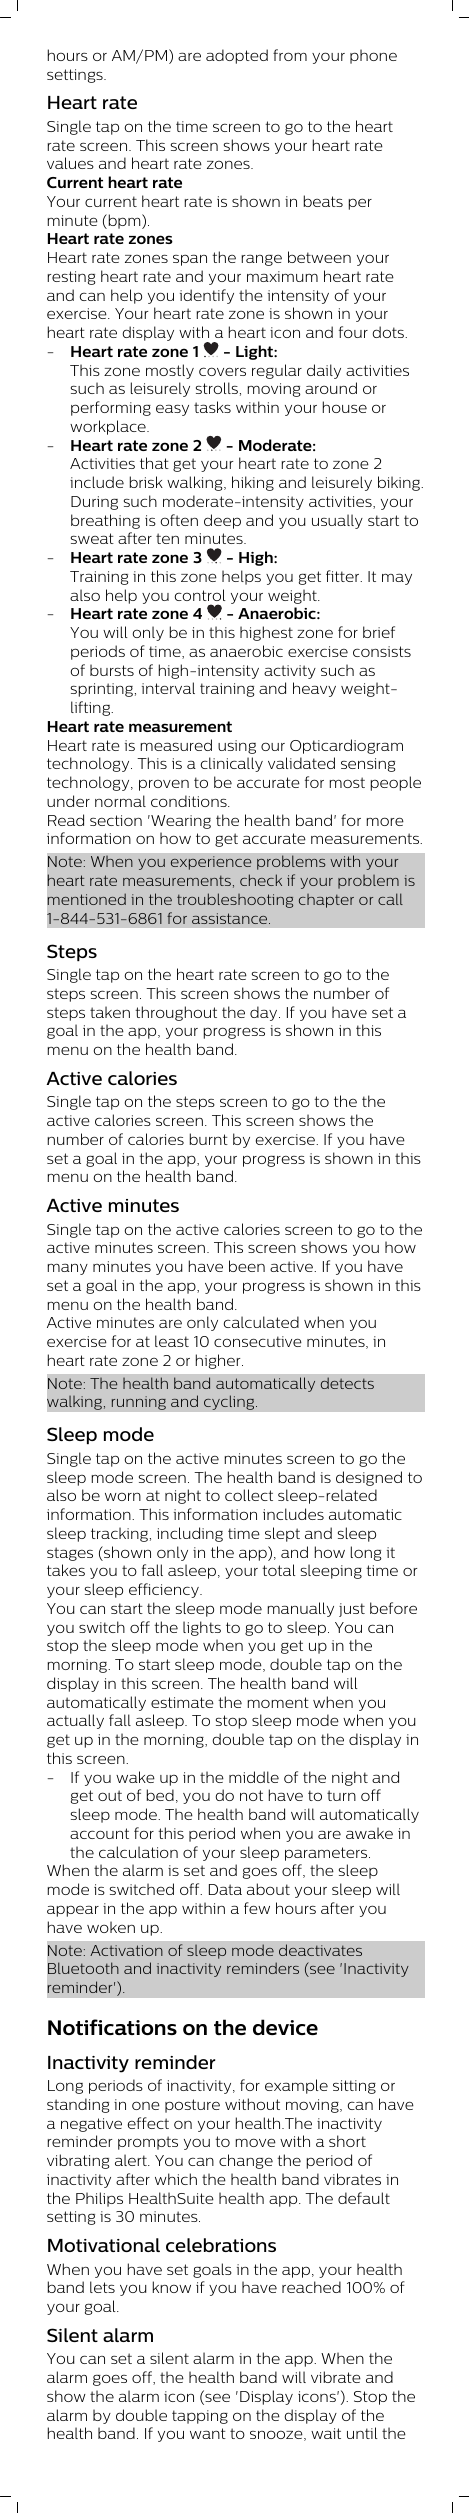 hours or AM/PM) are adopted from your phonesettings. Heart rateSingle tap on the time screen to go to the heartrate screen. This screen shows your heart ratevalues and heart rate zones.Current heart rateYour current heart rate is shown in beats perminute (bpm).Heart rate zonesHeart rate zones span the range between yourresting heart rate and your maximum heart rateand can help you identify the intensity of yourexercise. Your heart rate zone is shown in yourheart rate display with a heart icon and four dots. -Heart rate zone 1   - Light:This zone mostly covers regular daily activitiessuch as leisurely strolls, moving around orperforming easy tasks within your house orworkplace.-Heart rate zone 2   - Moderate:Activities that get your heart rate to zone 2include brisk walking, hiking and leisurely biking.During such moderate-intensity activities, yourbreathing is often deep and you usually start tosweat after ten minutes.-Heart rate zone 3   - High:Training in this zone helps you get fitter. It mayalso help you control your weight.-Heart rate zone 4   - Anaerobic:You will only be in this highest zone for briefperiods of time, as anaerobic exercise consistsof bursts of high-intensity activity such assprinting, interval training and heavy weight-lifting.Heart rate measurementHeart rate is measured using our Opticardiogramtechnology. This is a clinically validated sensingtechnology, proven to be accurate for most peopleunder normal conditions.Read section &apos;Wearing the health band&apos; for moreinformation on how to get accurate measurements.Note: When you experience problems with yourheart rate measurements, check if your problem ismentioned in the troubleshooting chapter or call1-844-531-6861 for assistance.StepsSingle tap on the heart rate screen to go to thesteps screen. This screen shows the number ofsteps taken throughout the day. If you have set agoal in the app, your progress is shown in thismenu on the health band.Active caloriesSingle tap on the steps screen to go to the theactive calories screen. This screen shows thenumber of calories burnt by exercise. If you haveset a goal in the app, your progress is shown in thismenu on the health band.Active minutesSingle tap on the active calories screen to go to theactive minutes screen. This screen shows you howmany minutes you have been active. If you haveset a goal in the app, your progress is shown in thismenu on the health band. Active minutes are only calculated when youexercise for at least 10 consecutive minutes, inheart rate zone 2 or higher. Note: The health band automatically detectswalking, running and cycling.Sleep modeSingle tap on the active minutes screen to go thesleep mode screen. The health band is designed toalso be worn at night to collect sleep-relatedinformation. This information includes automaticsleep tracking, including time slept and sleepstages (shown only in the app), and how long ittakes you to fall asleep, your total sleeping time oryour sleep efficiency. You can start the sleep mode manually just beforeyou switch off the lights to go to sleep. You canstop the sleep mode when you get up in themorning. To start sleep mode, double tap on thedisplay in this screen. The health band willautomatically estimate the moment when youactually fall asleep. To stop sleep mode when youget up in the morning, double tap on the display inthis screen.- If you wake up in the middle of the night andget out of bed, you do not have to turn offsleep mode. The health band will automaticallyaccount for this period when you are awake inthe calculation of your sleep parameters.When the alarm is set and goes off, the sleepmode is switched off. Data about your sleep willappear in the app within a few hours after youhave woken up.Note: Activation of sleep mode deactivatesBluetooth and inactivity reminders (see &apos;Inactivityreminder&apos;).Notifications on the deviceInactivity reminderLong periods of inactivity, for example sitting orstanding in one posture without moving, can havea negative effect on your health.The inactivityreminder prompts you to move with a shortvibrating alert. You can change the period ofinactivity after which the health band vibrates inthe Philips HealthSuite health app. The defaultsetting is 30 minutes.Motivational celebrationsWhen you have set goals in the app, your healthband lets you know if you have reached 100% ofyour goal. Silent alarmYou can set a silent alarm in the app. When thealarm goes off, the health band will vibrate andshow the alarm icon (see &apos;Display icons&apos;). Stop thealarm by double tapping on the display of thehealth band. If you want to snooze, wait until the